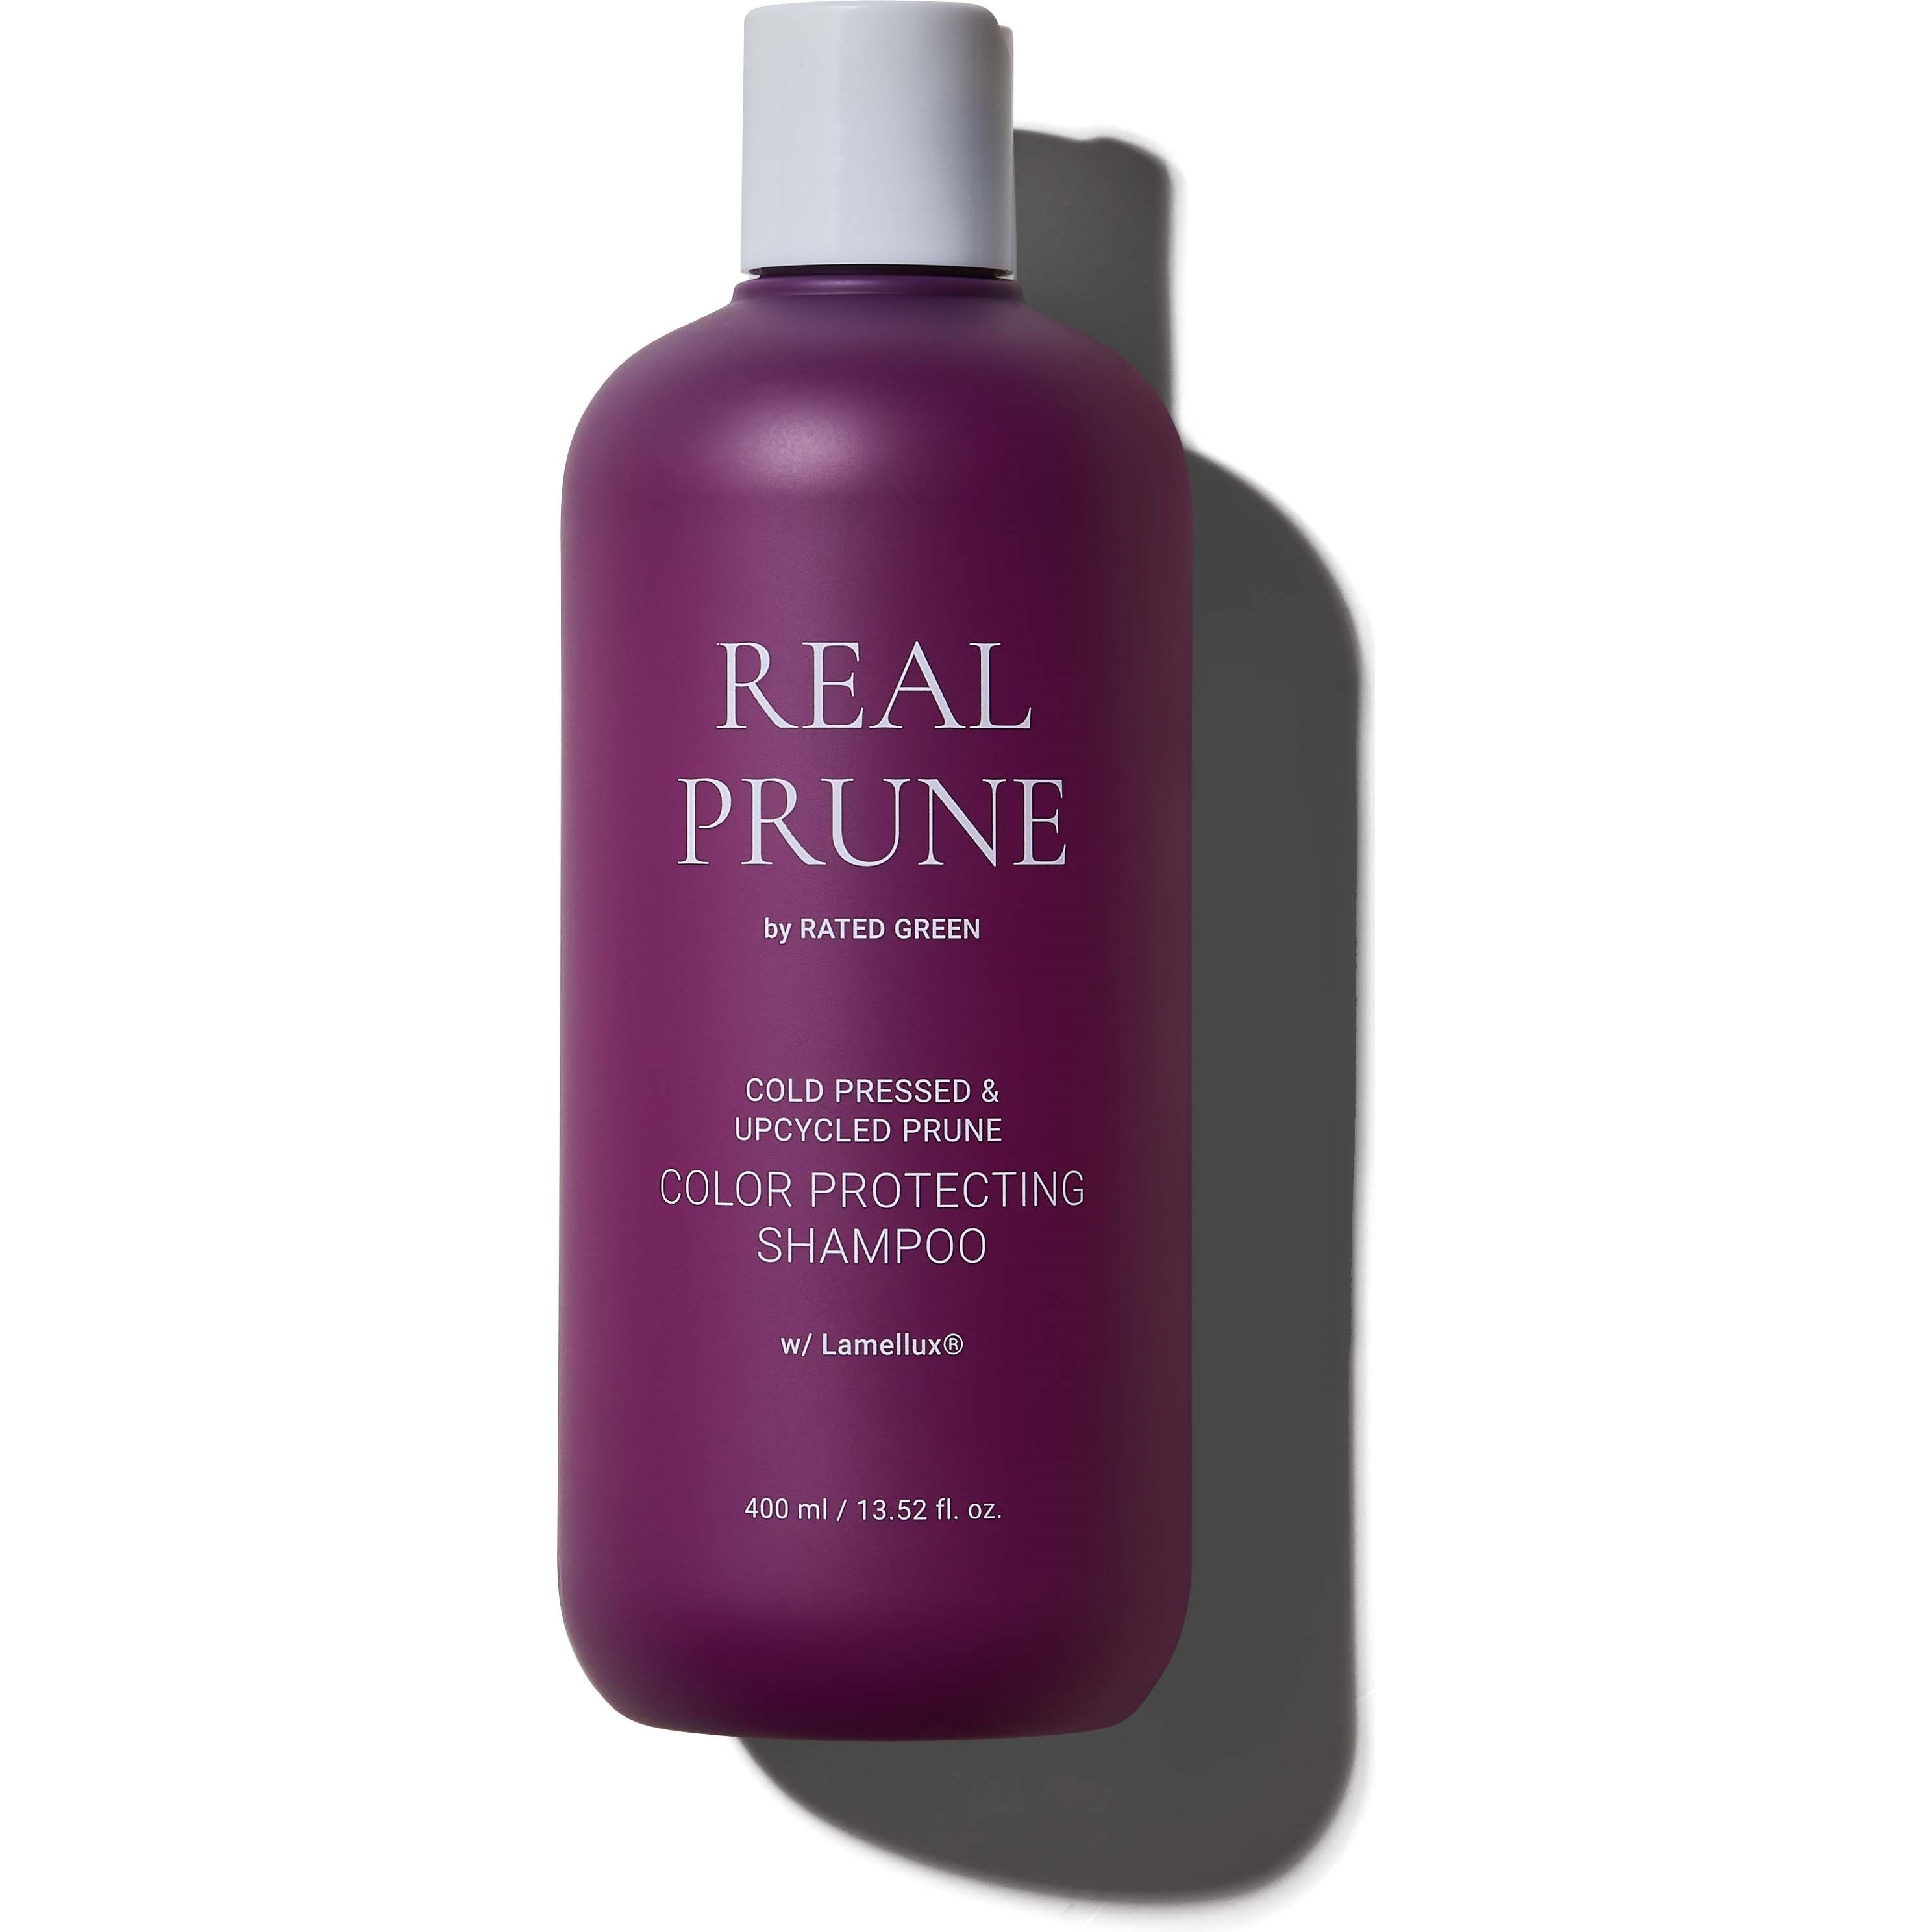 Rated Green Real Prune Cold Pressed & Upcycled Prune Color Protecting